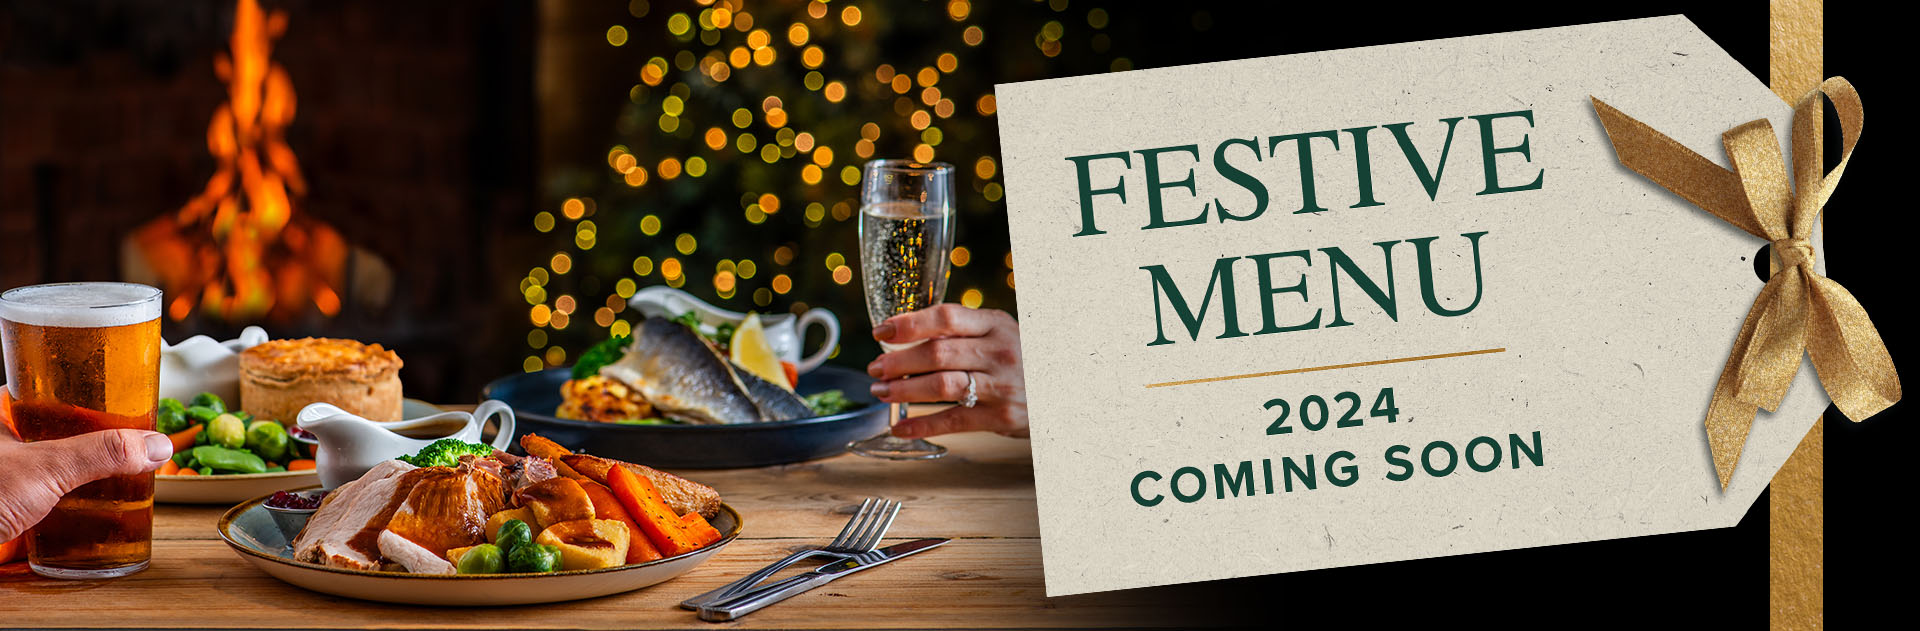 Festive Menu at Red Lion, Lindfield 